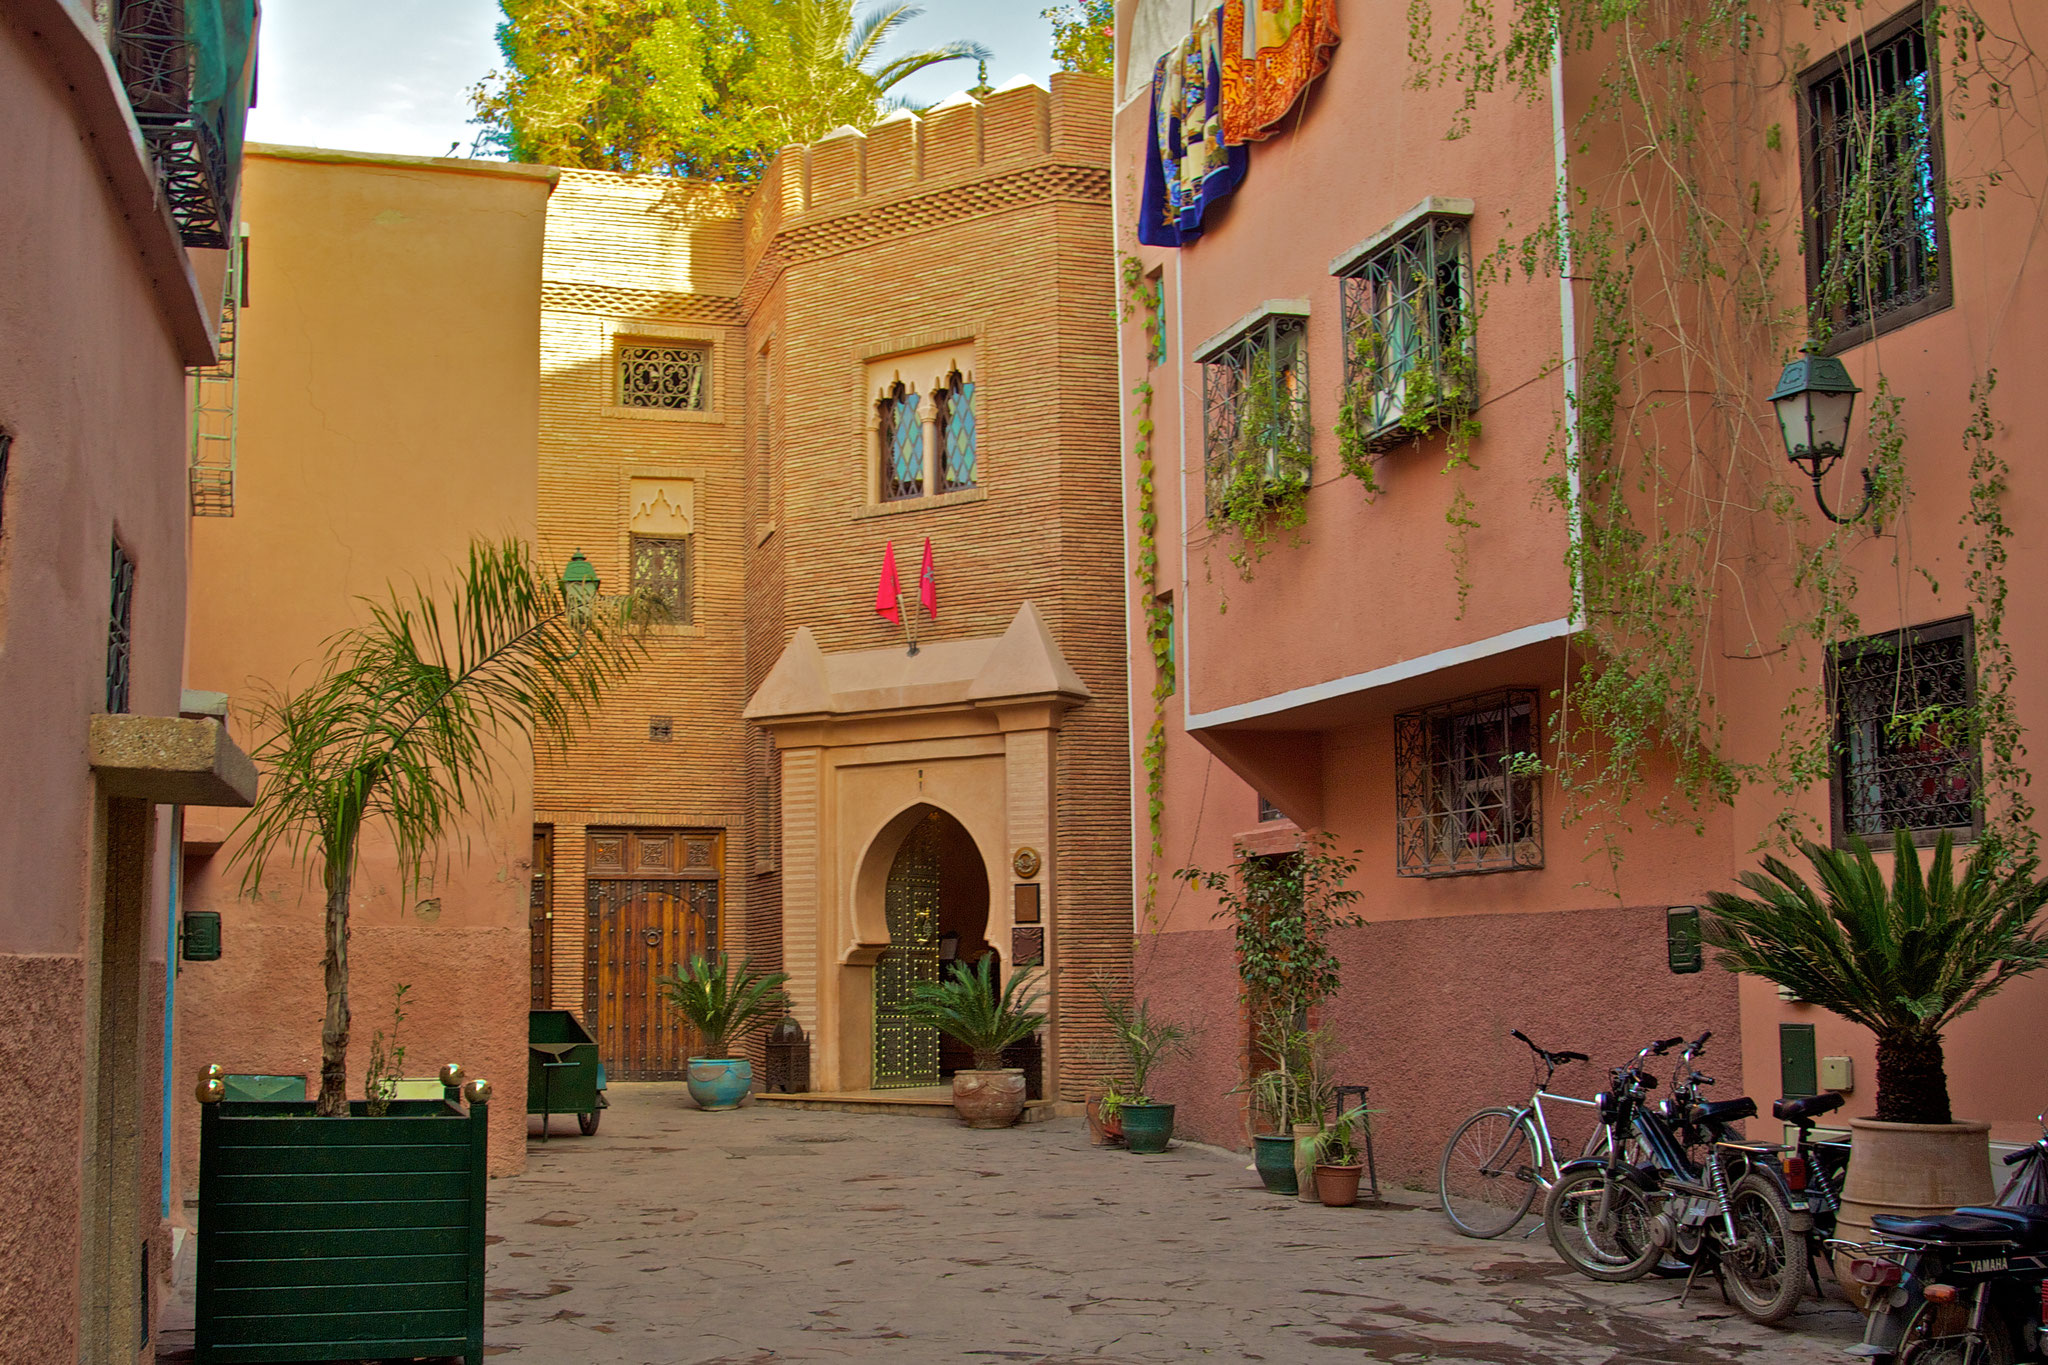 Entrance of a hotel in the Medina